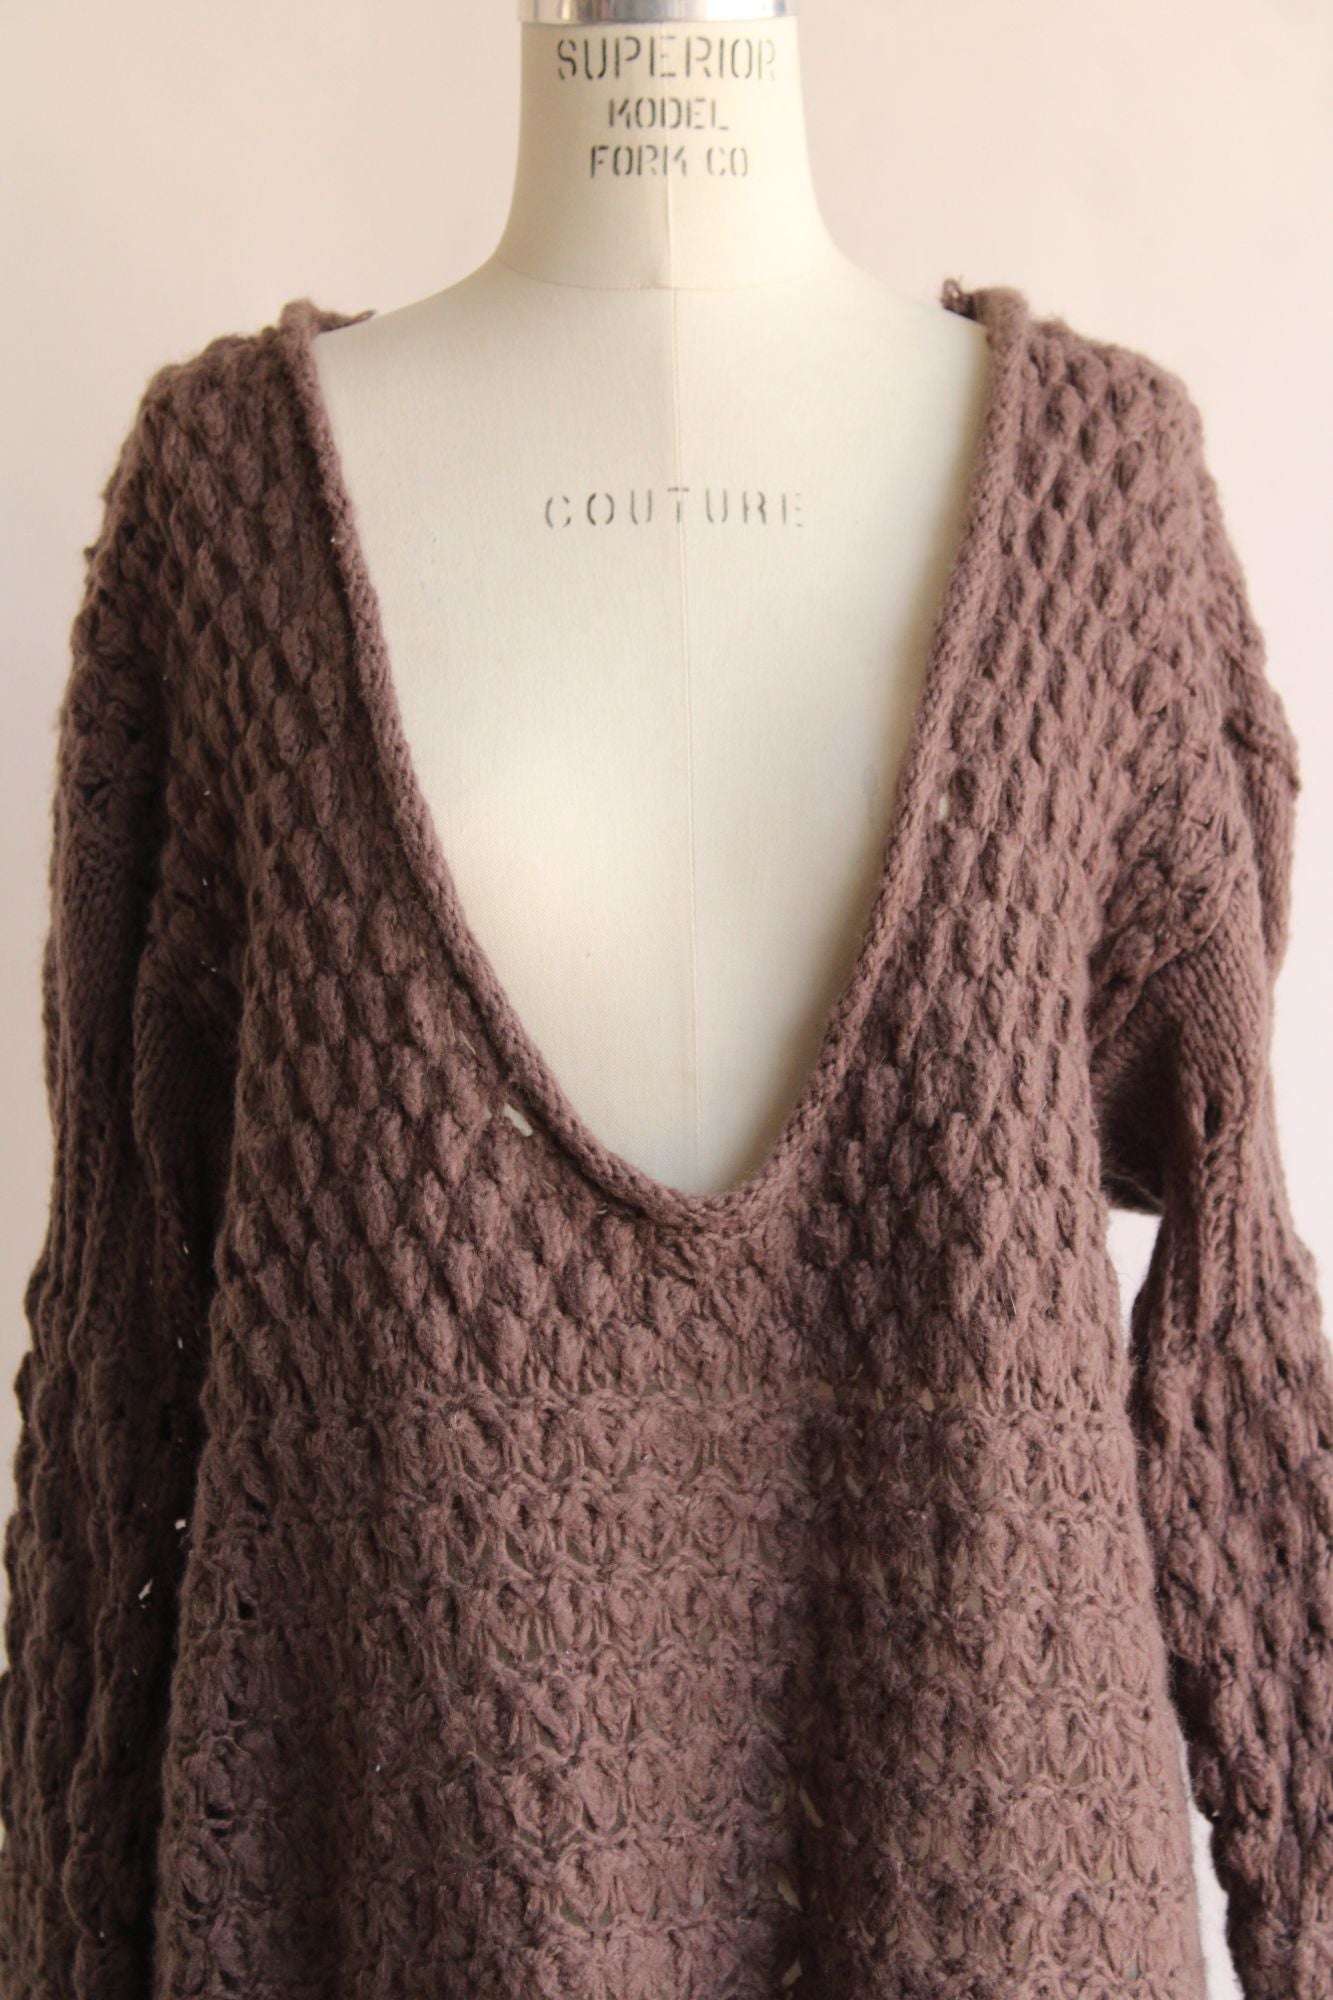 Free People womens Sweater, brown Knit, Size large, deep V neck, bell sleeves